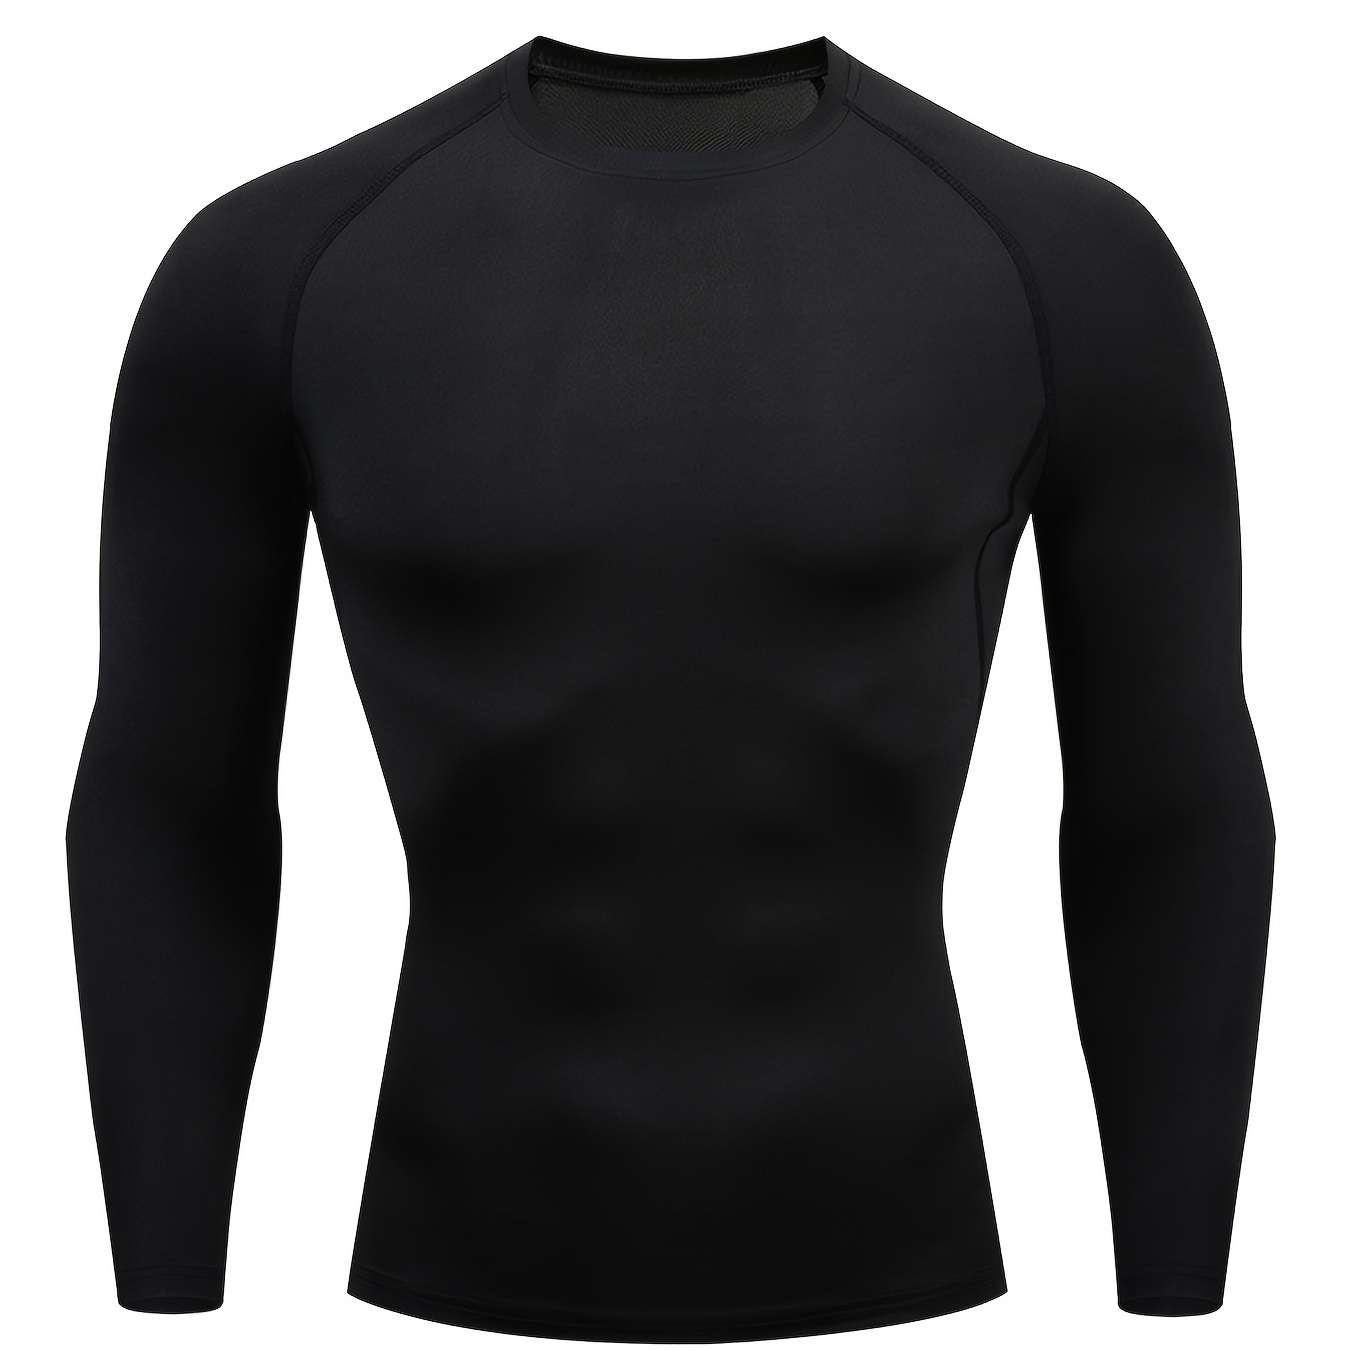 

Men's Compression Shirts: Get Fit Fast With Long Sleeve Athletic Workout Tops!